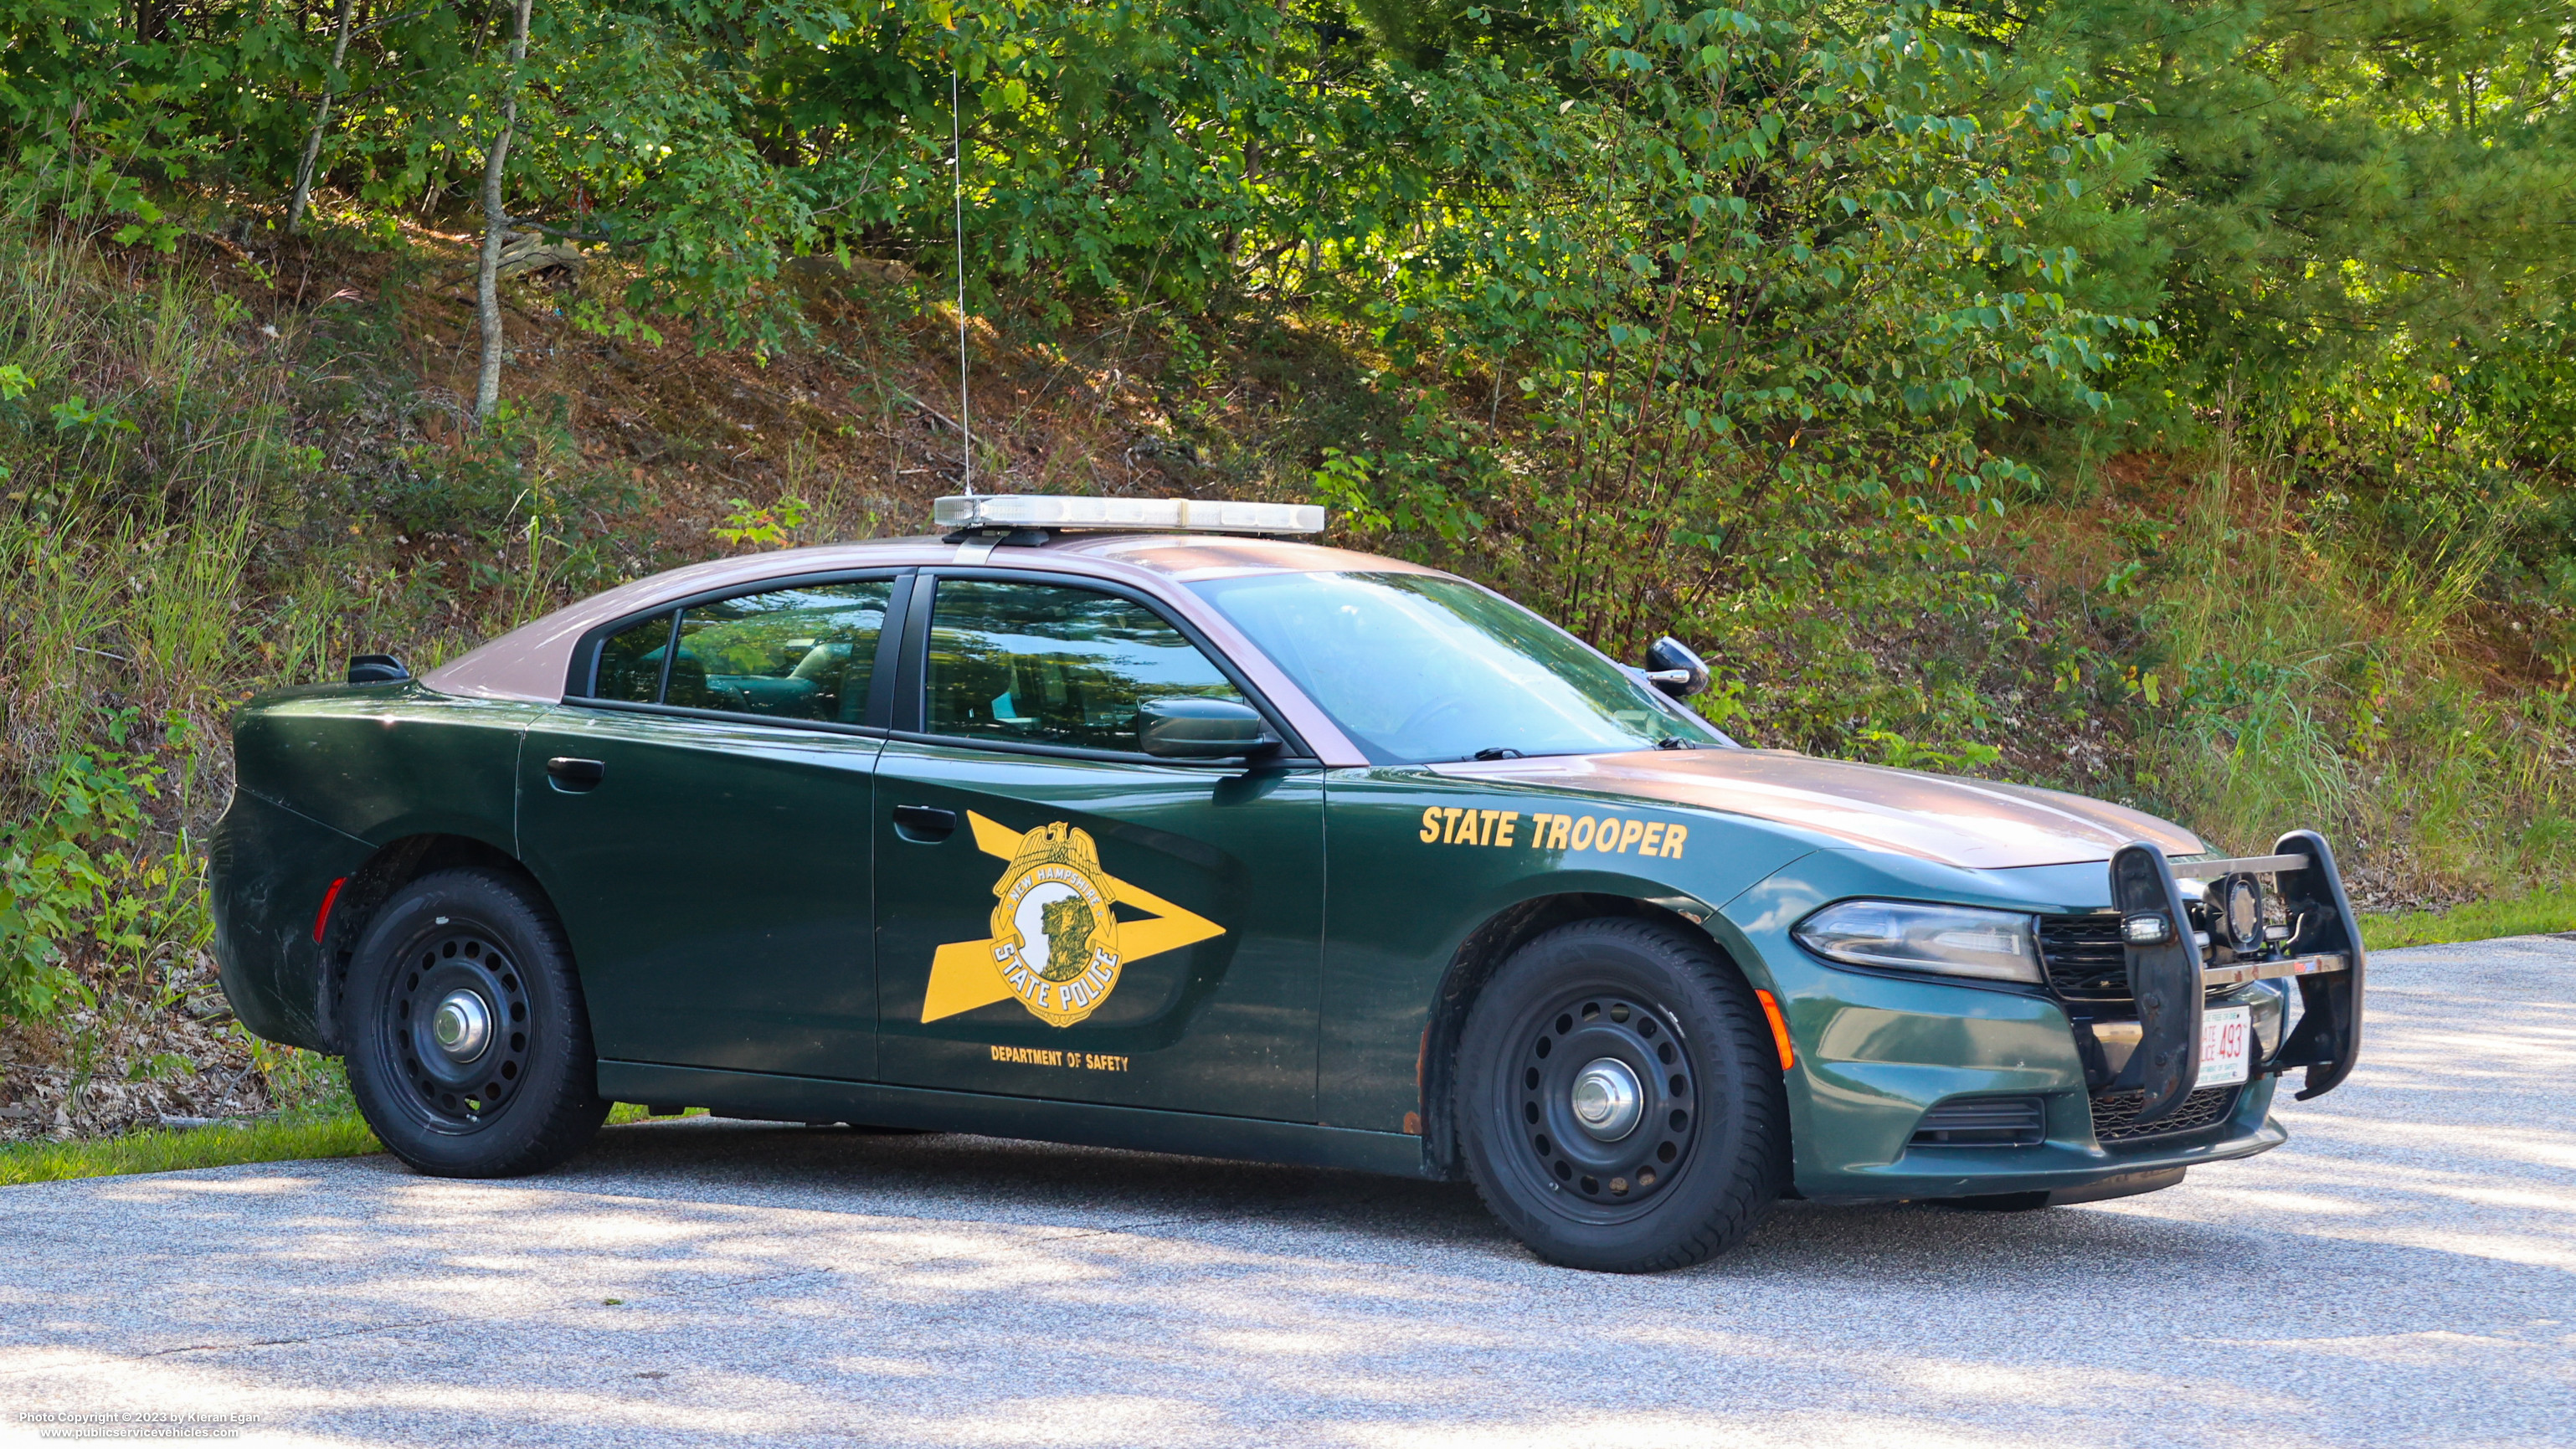 A photo  of New Hampshire State Police
            Cruiser 493, a 2015-2016 Dodge Charger             taken by Kieran Egan